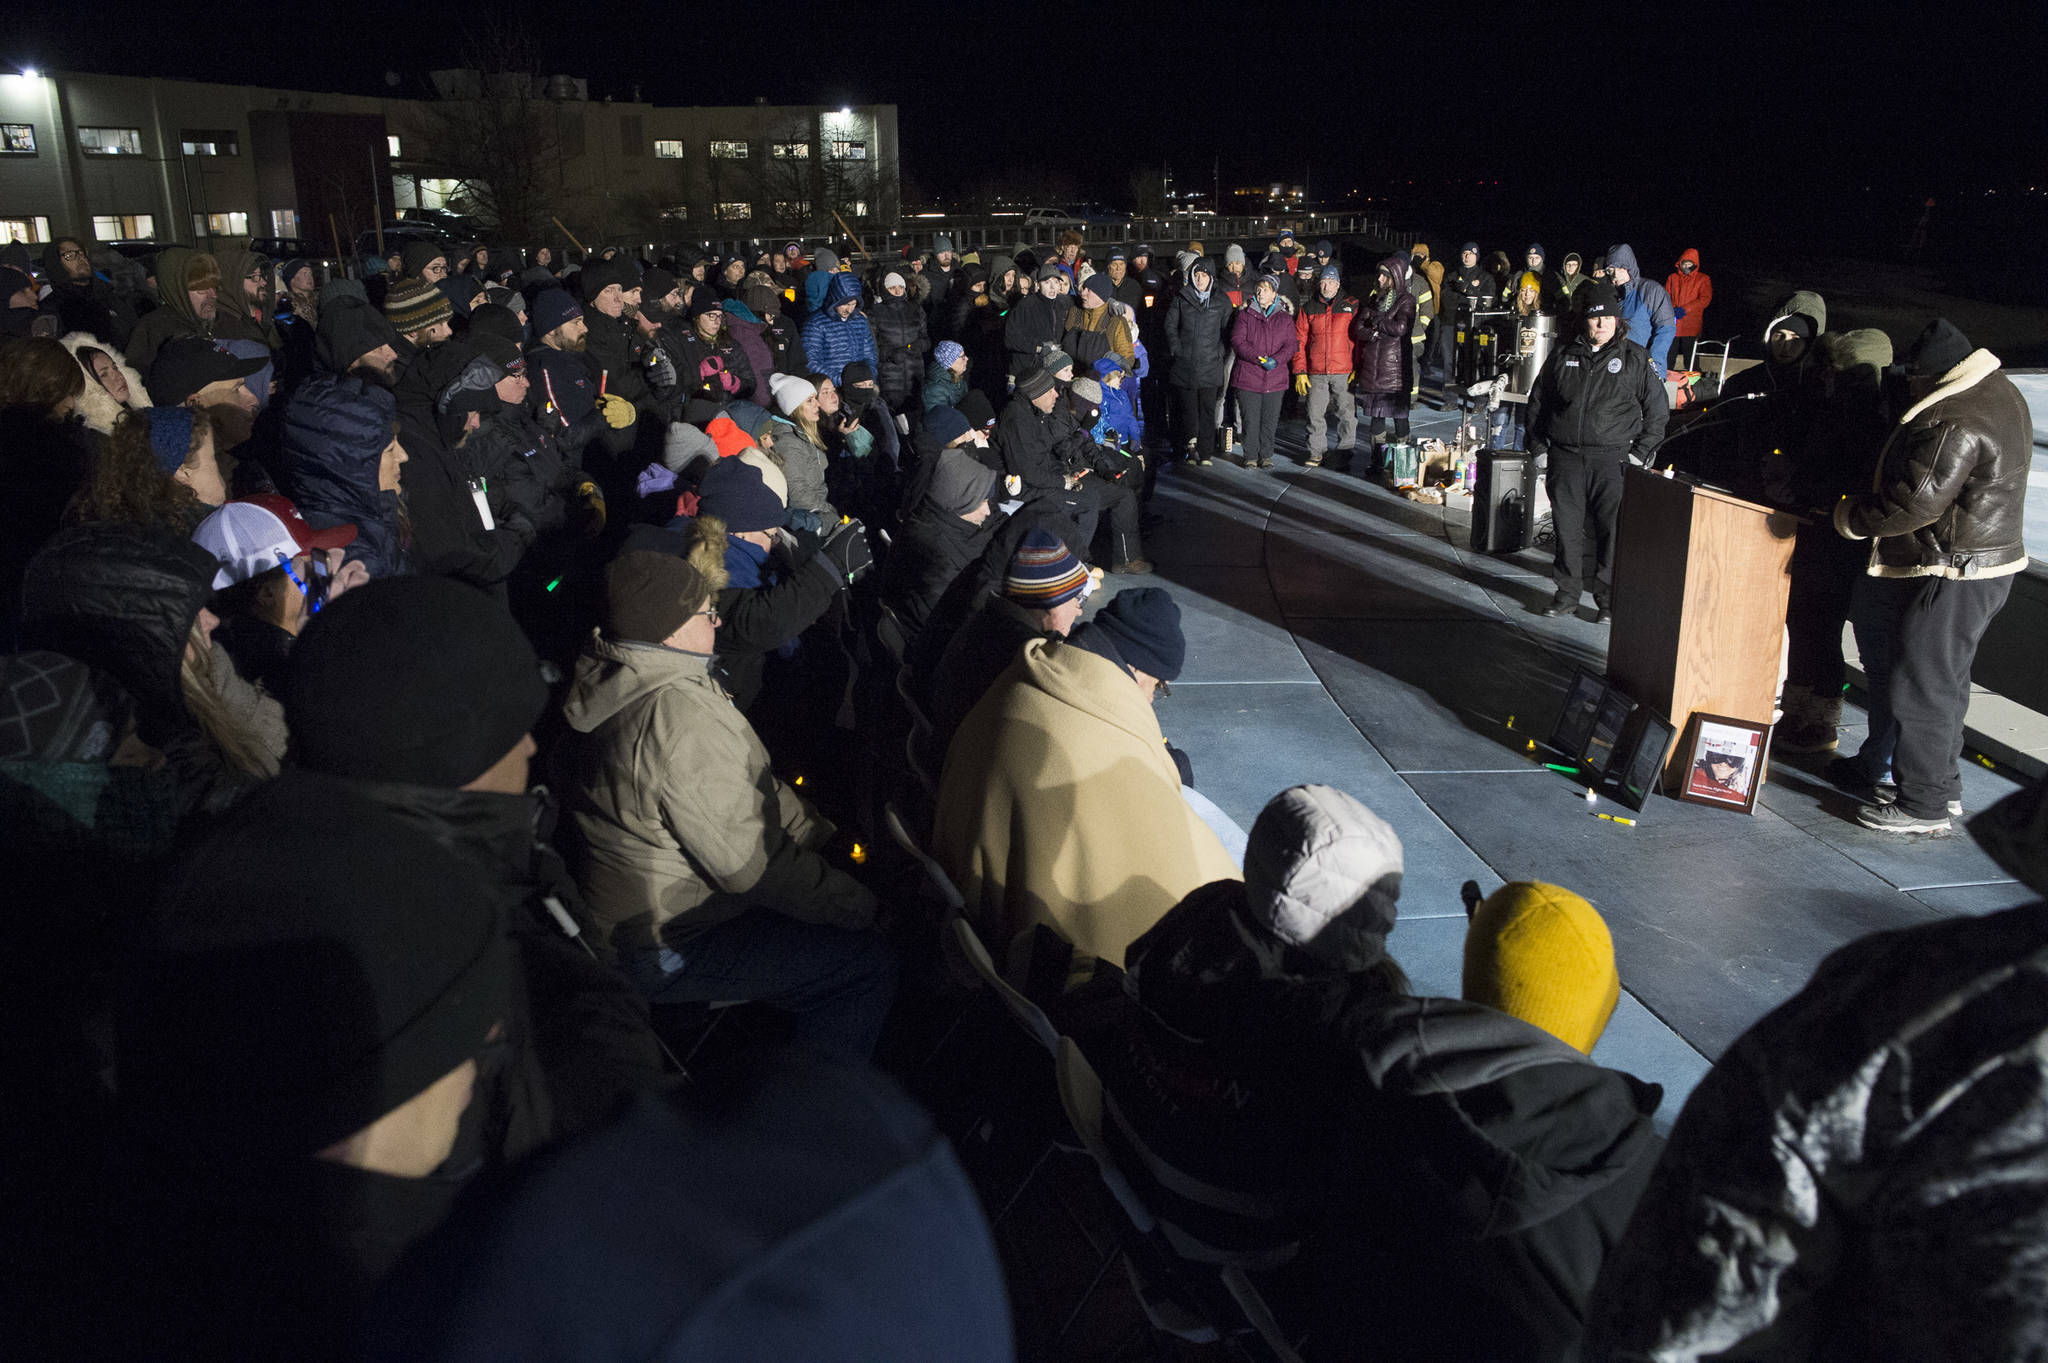 Hundreds of Juneau residents turnout Friday, Feb. 1, 2019, in 8-degree weather for a candlelight vigil at Mayor Bill Overstreet Park for the Guardian medical flight crew that went missing this week. (Michael Penn | Juneau Empire)